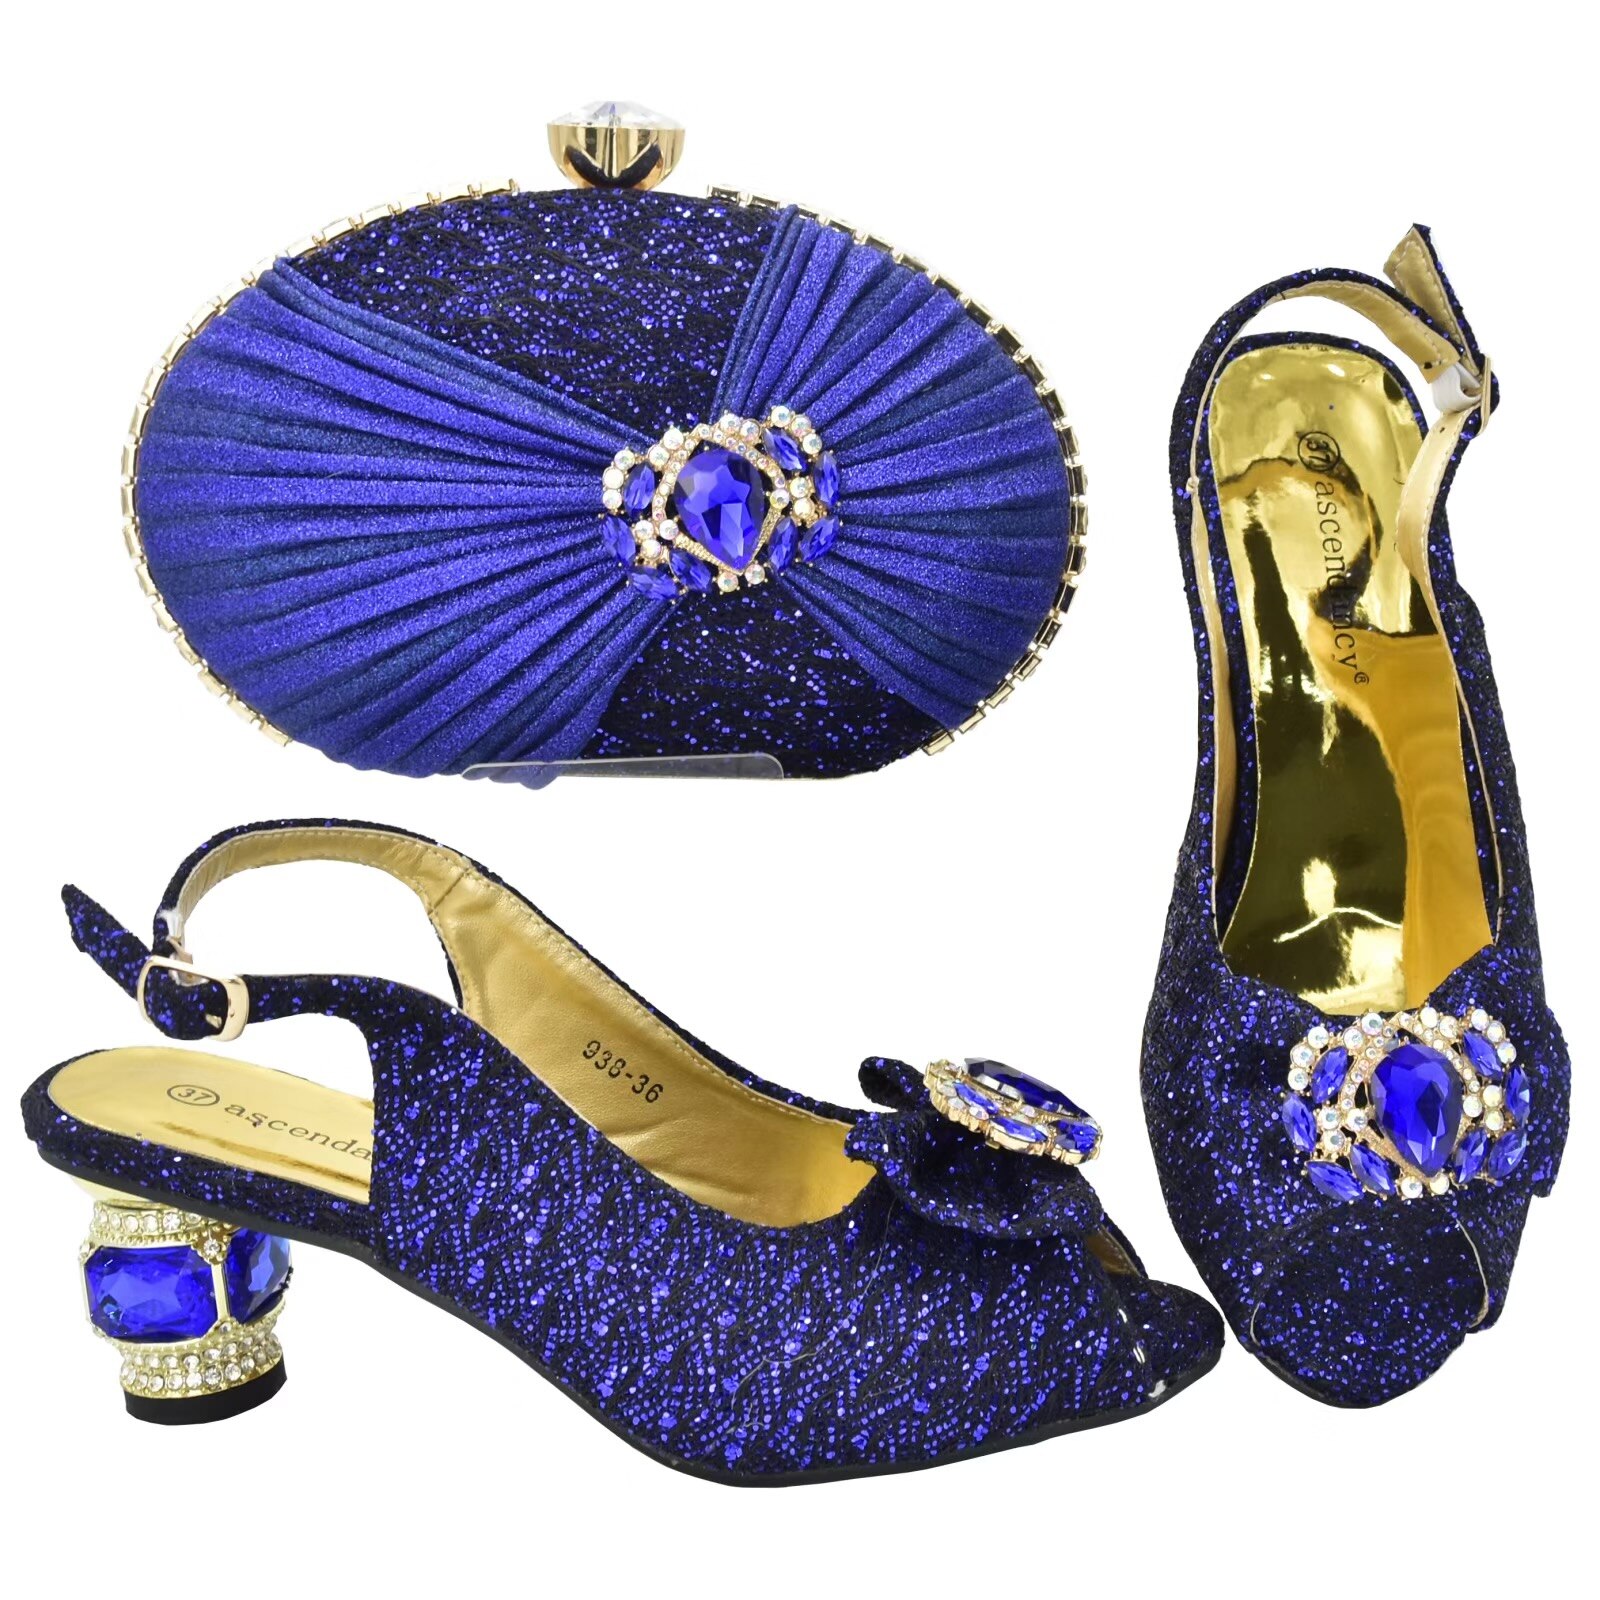 2022 New Design Italian Women Shoes and Bag Set in Royal Blue Color High Quality Slingbacks Pumps for Wedding Party 2621